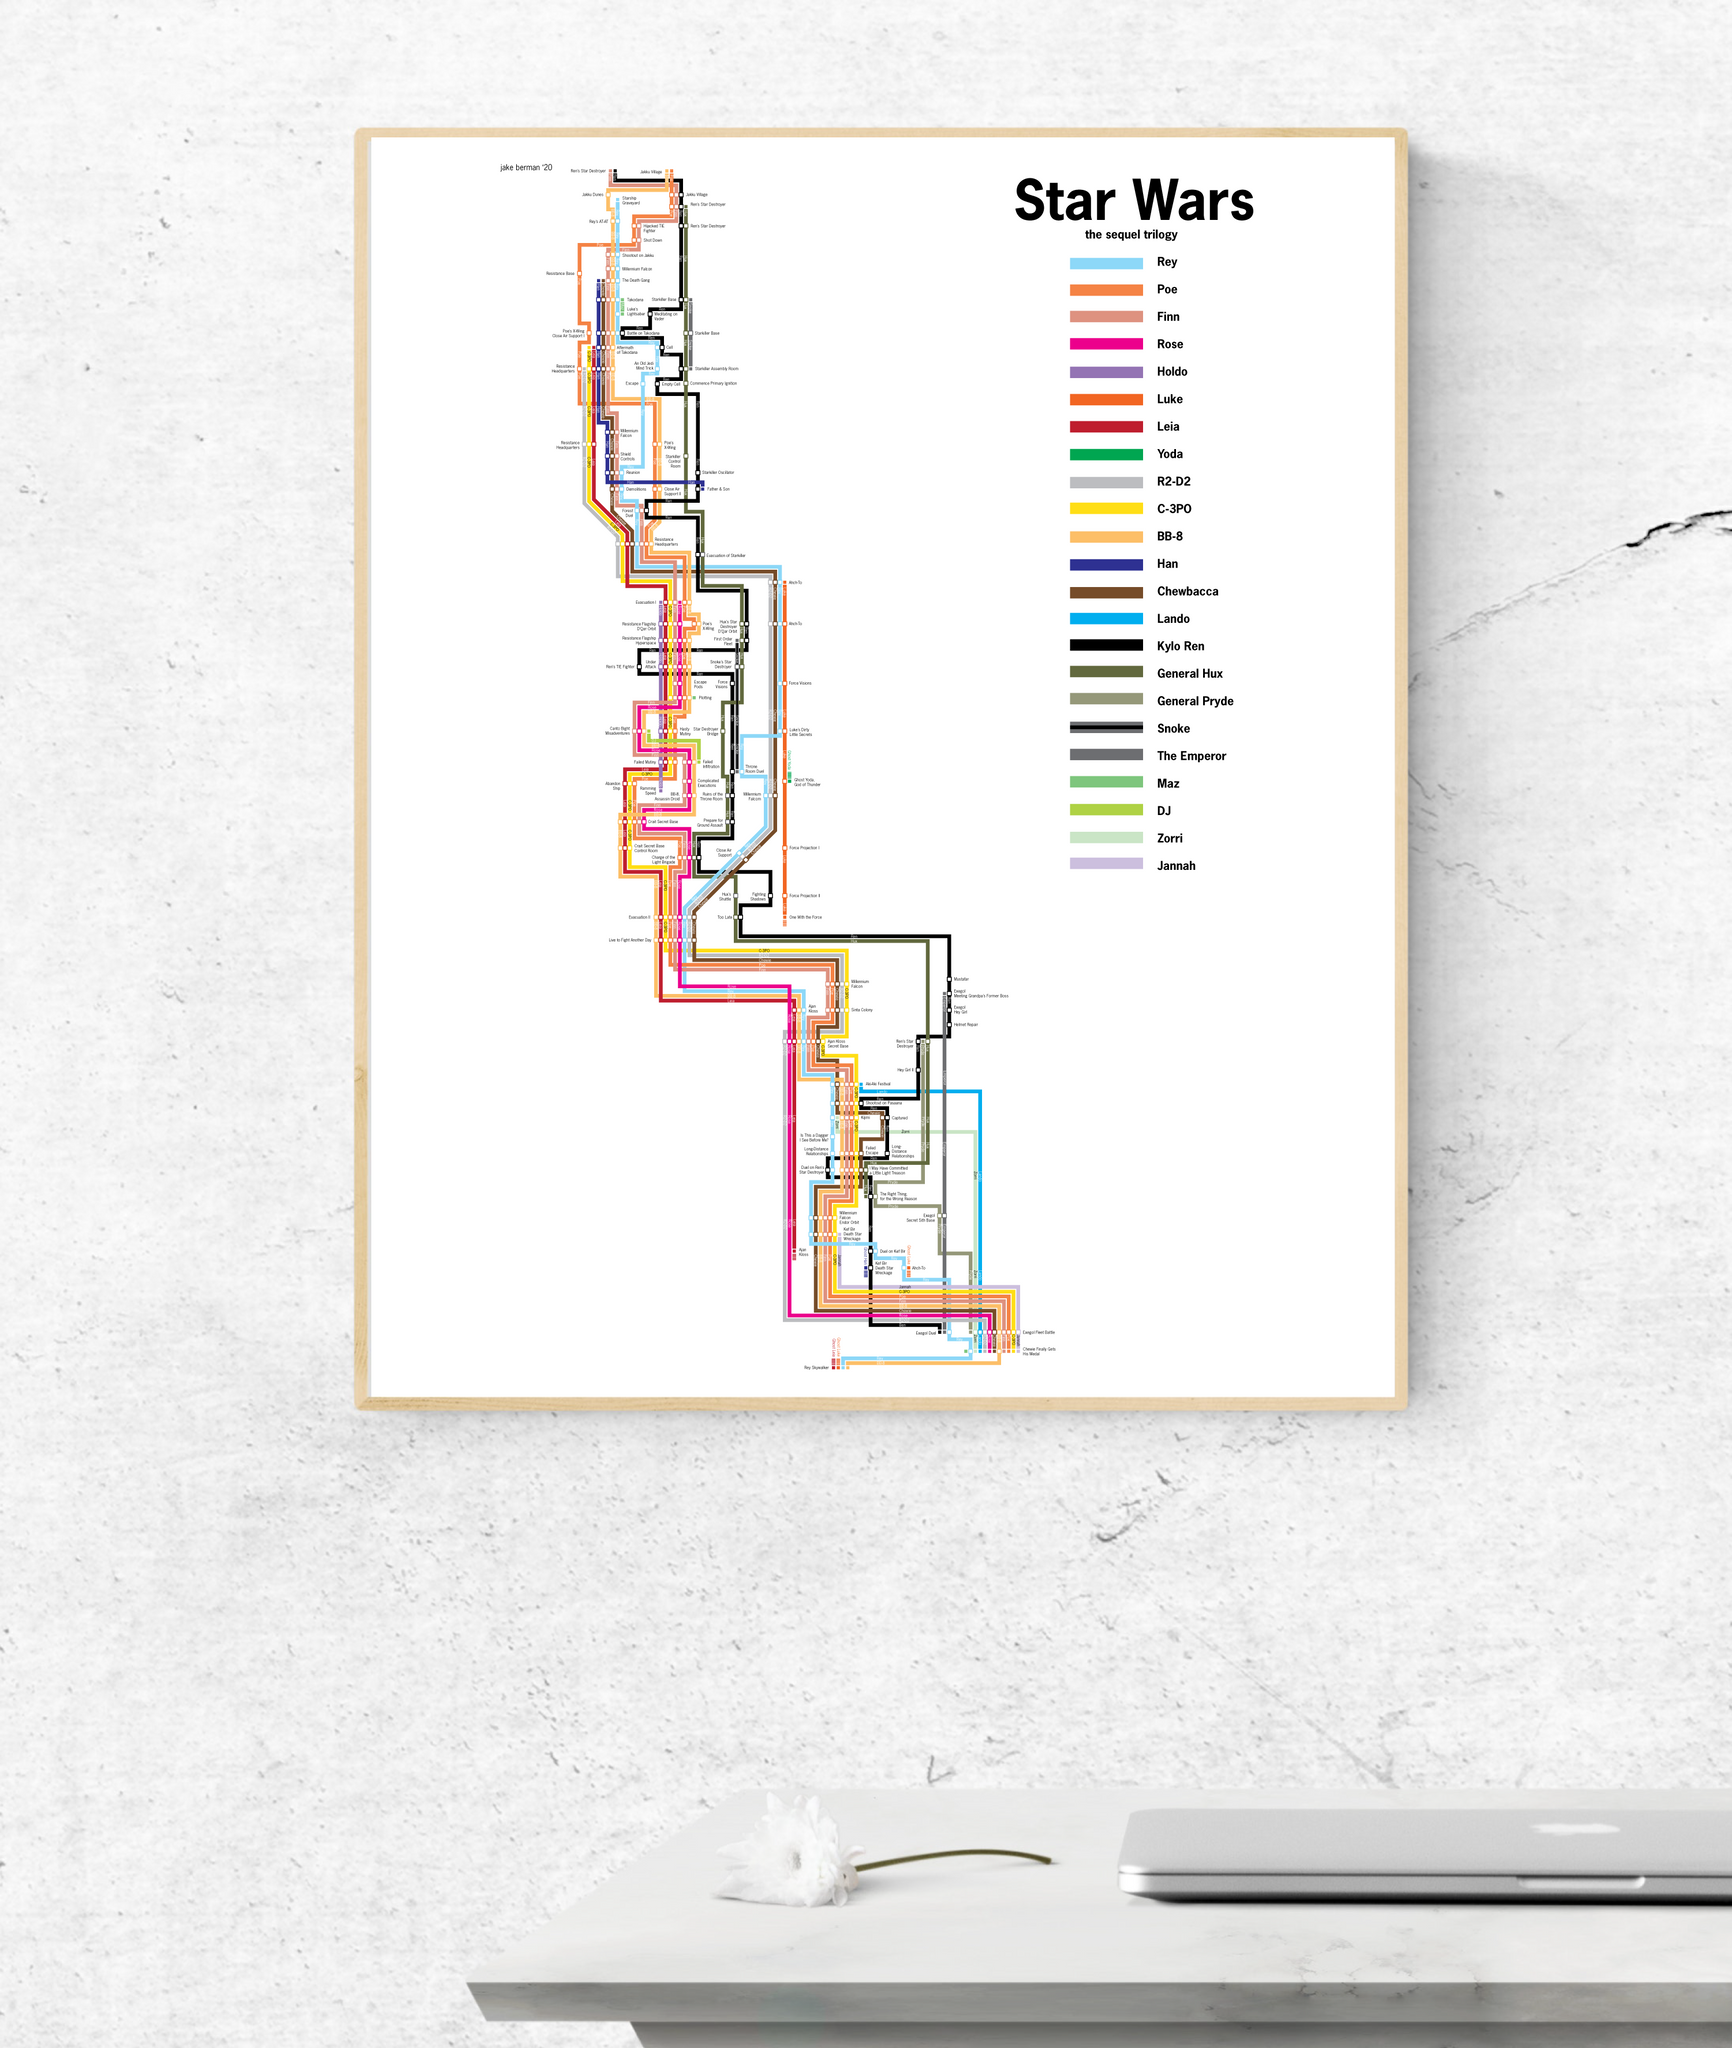 Star Wars: the complete sequel trilogy, combined into one diagram